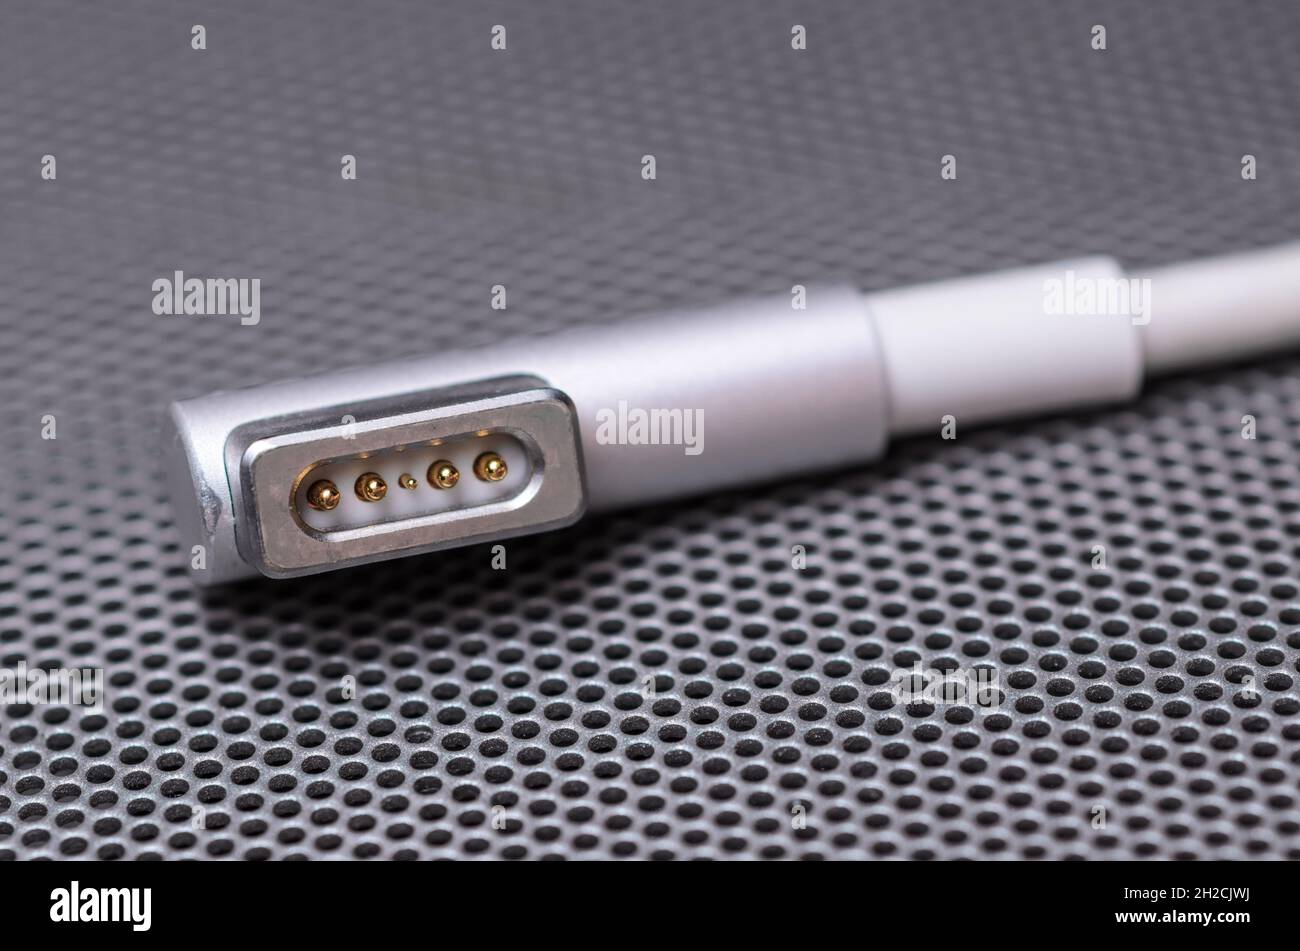 Close-up of Apple MagSafe power connector for MacBook Pro on metallic mesh  surface Stock Photo - Alamy